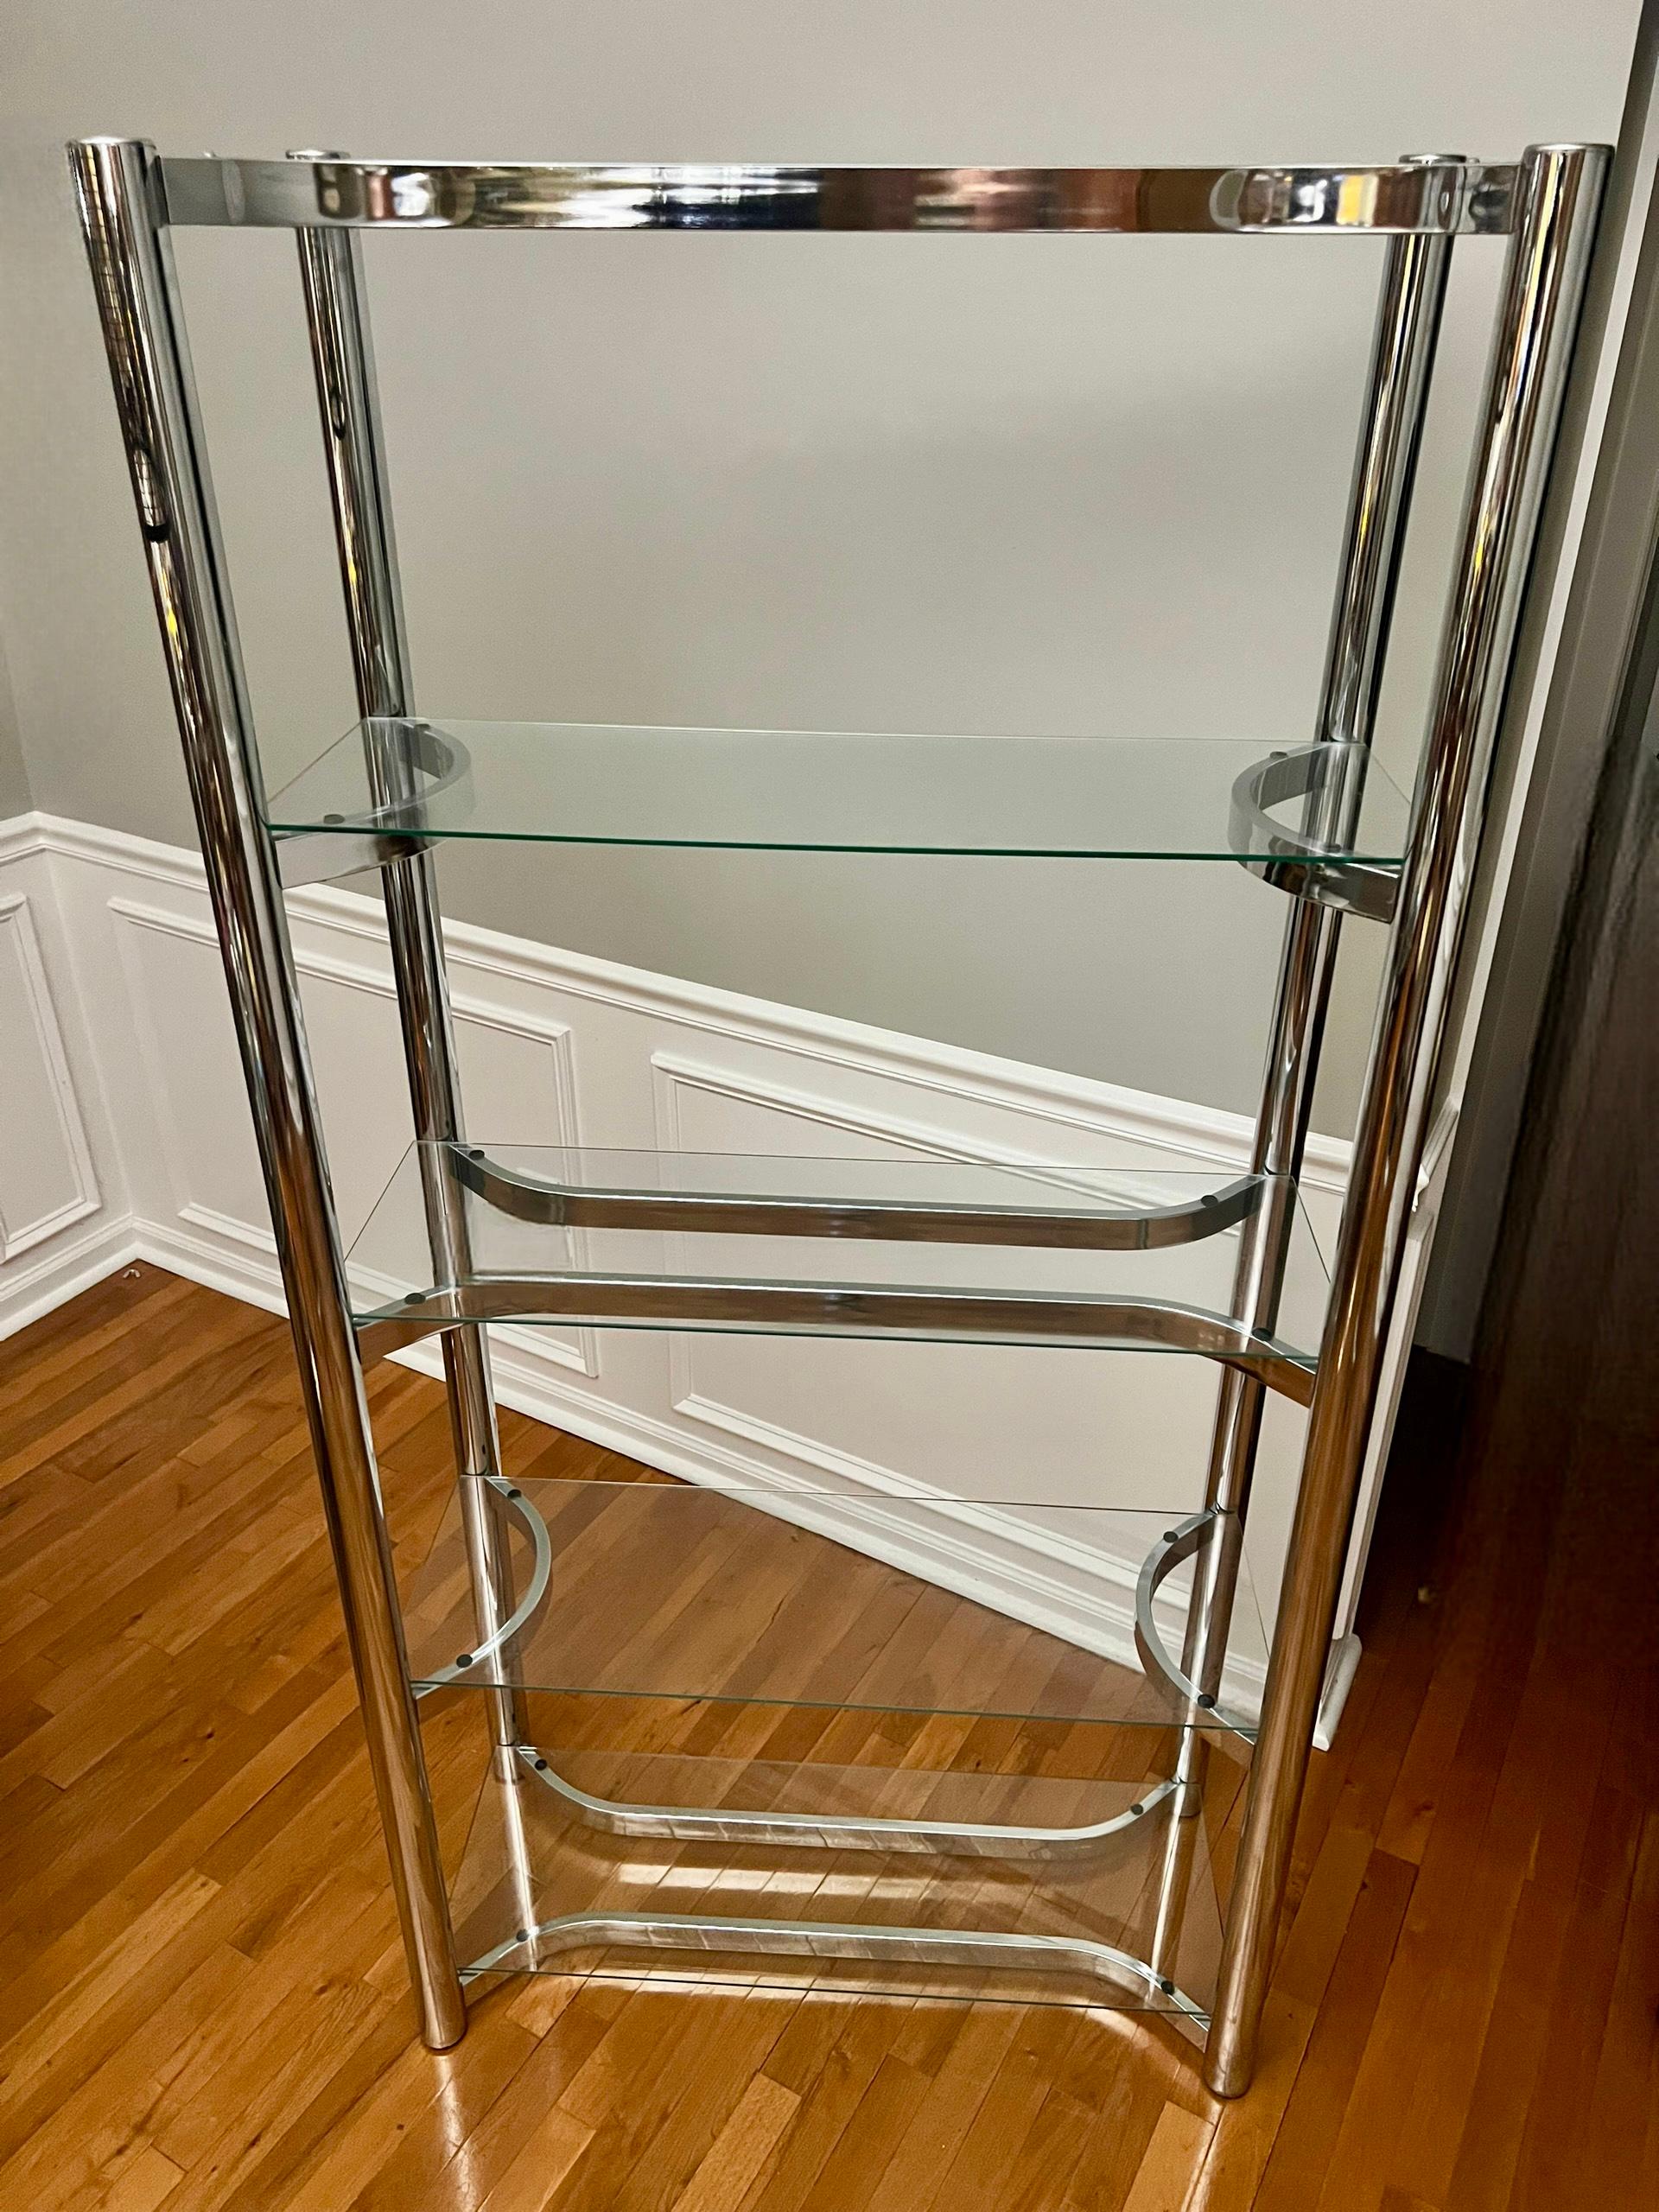 Polished Chrome and Glass Etagere Attributed to Milo Baughman, 1970s For Sale